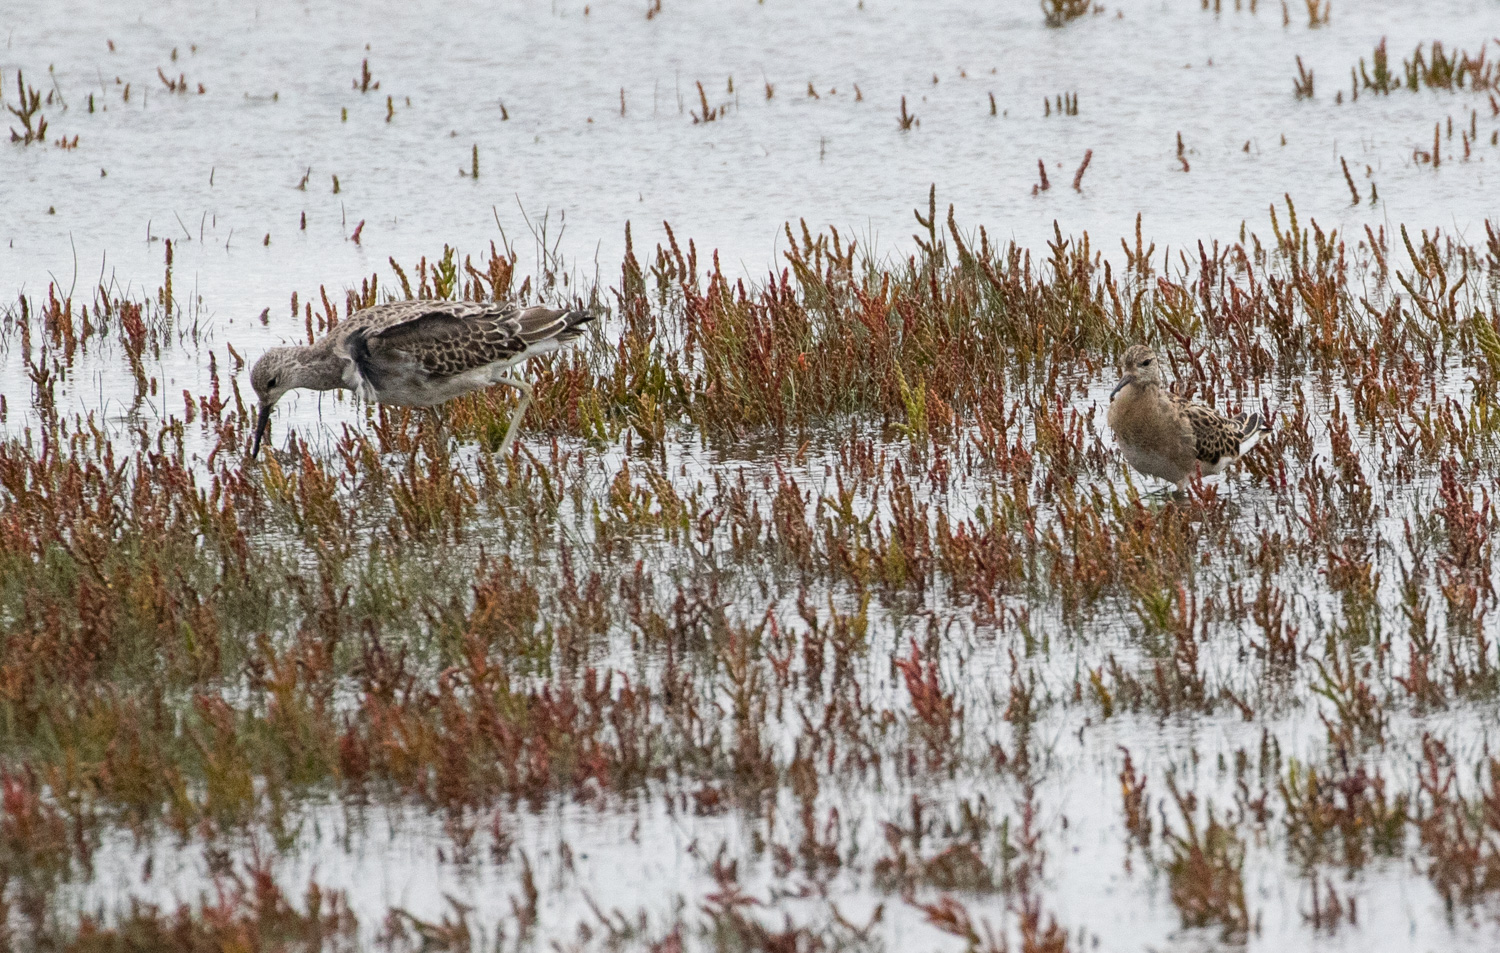 Ruff showing quite extreme size variation